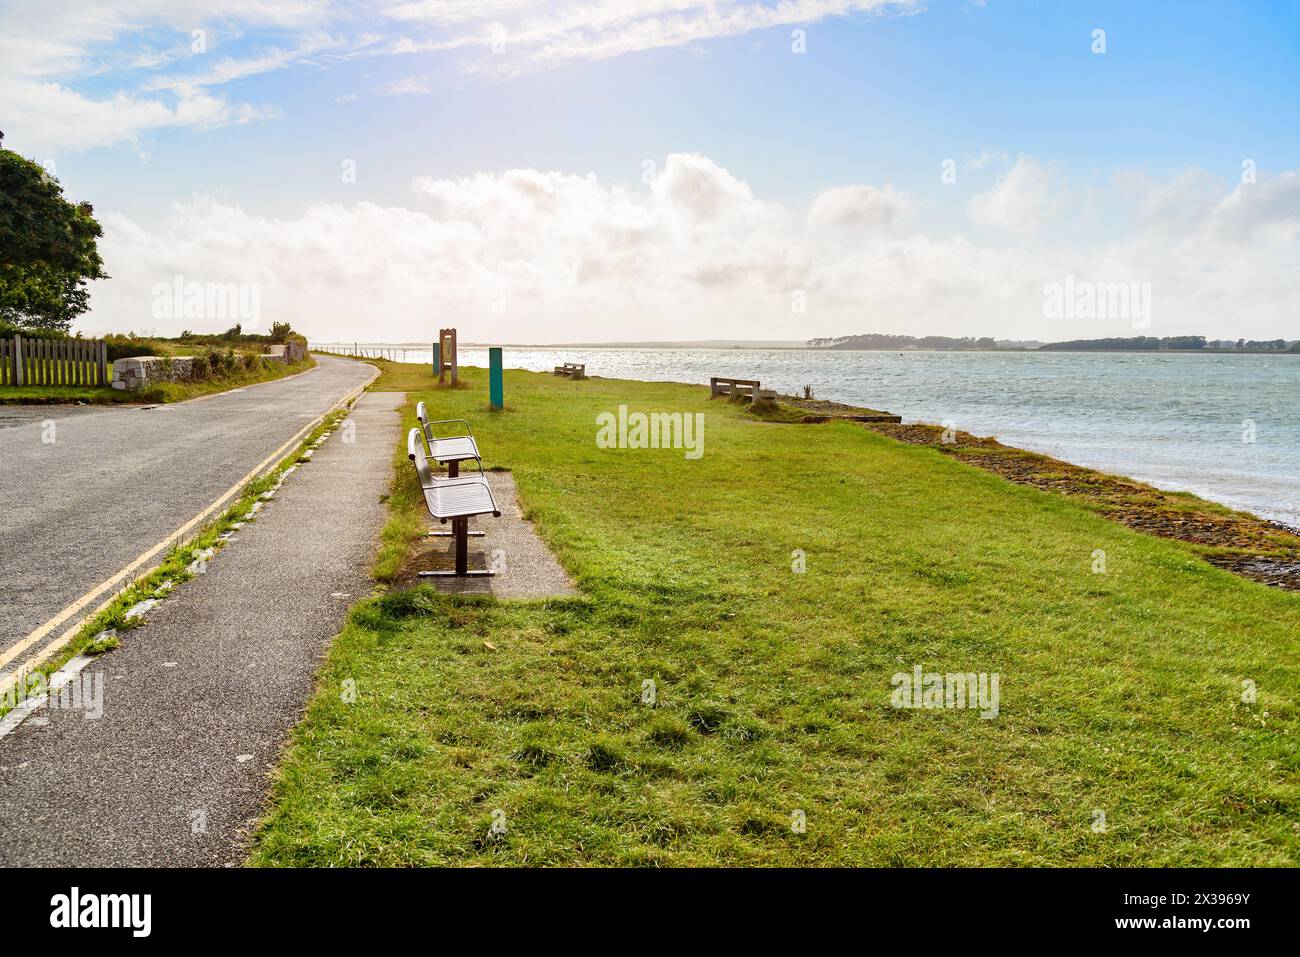 Benches on grass along a coast road at sunset in summer Stock Photo